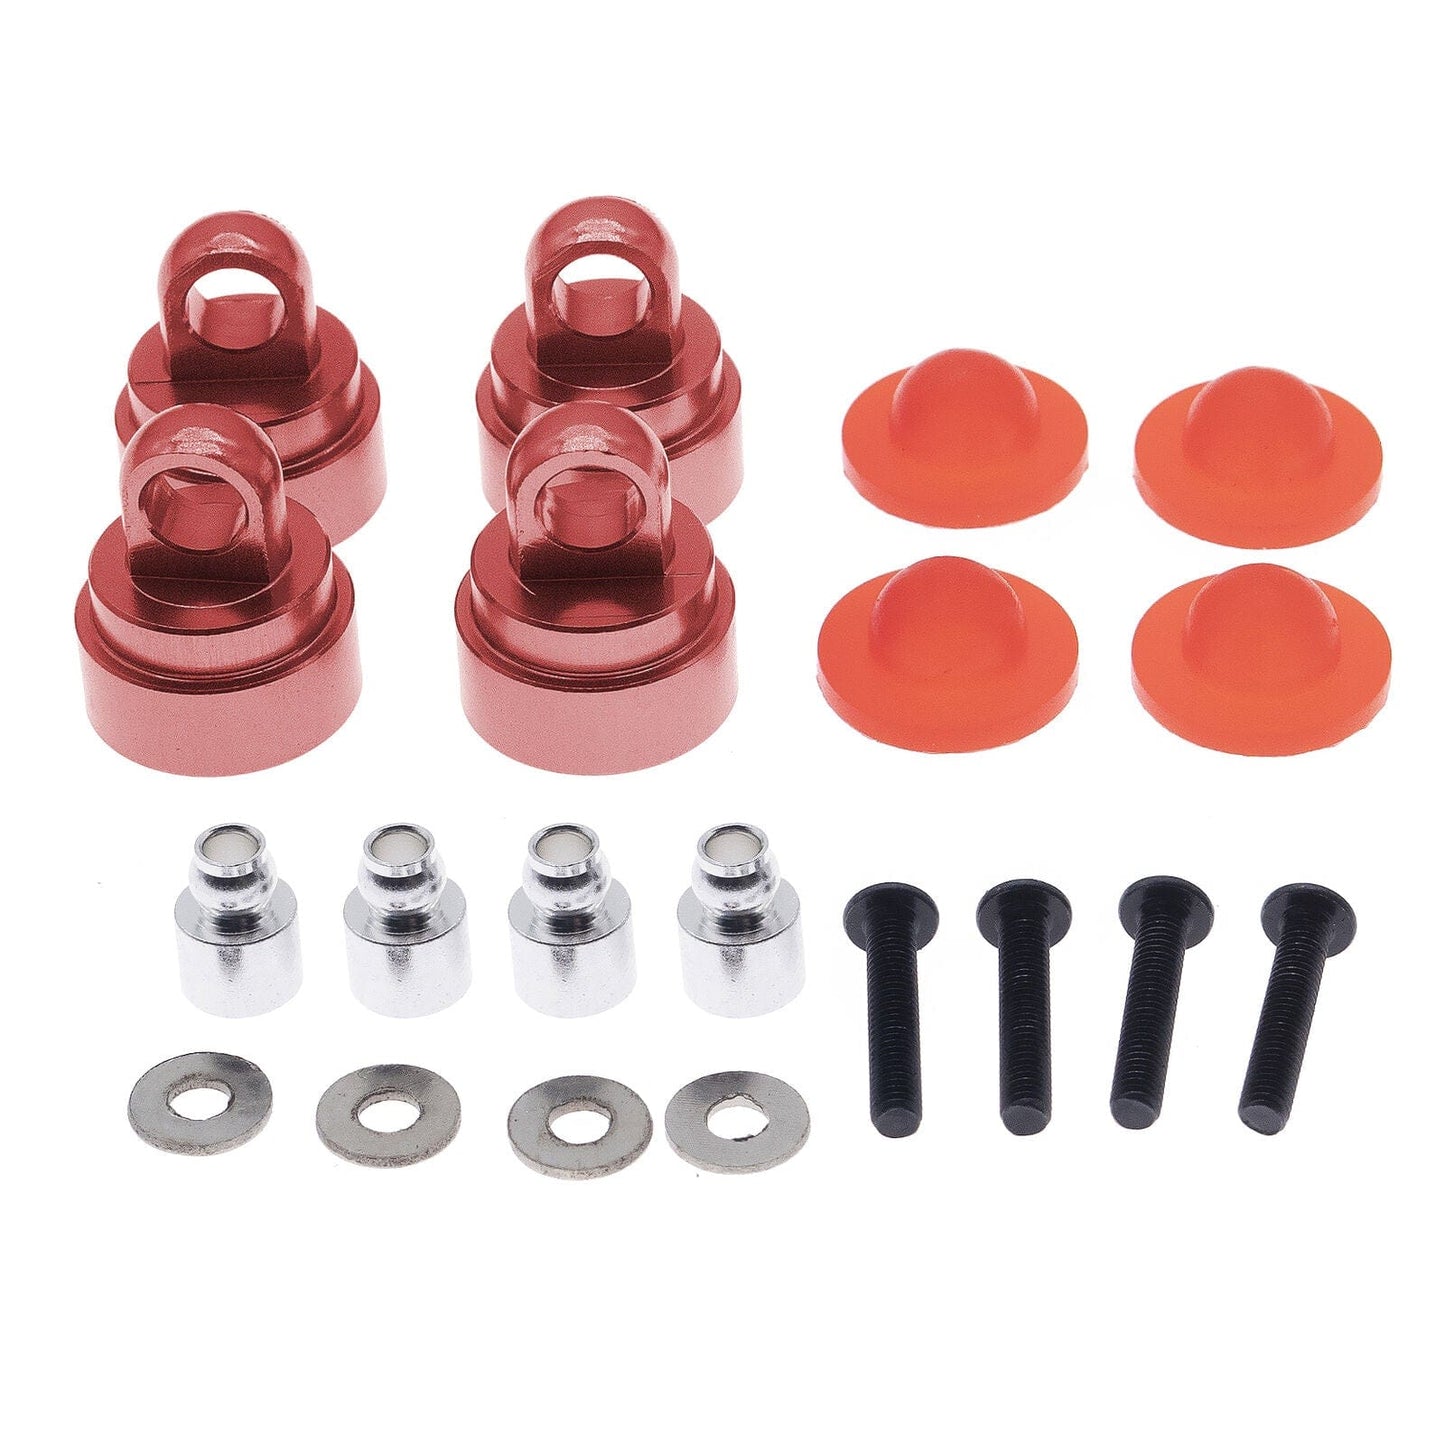 RCAWD ECX UPGRADE PARTS Shock cap,piston,pivot ball RCAWD Aluminum CNC DIY Upgrade Hop-up parts For 1-10 ECX 2WD Series Ruckus AMP red